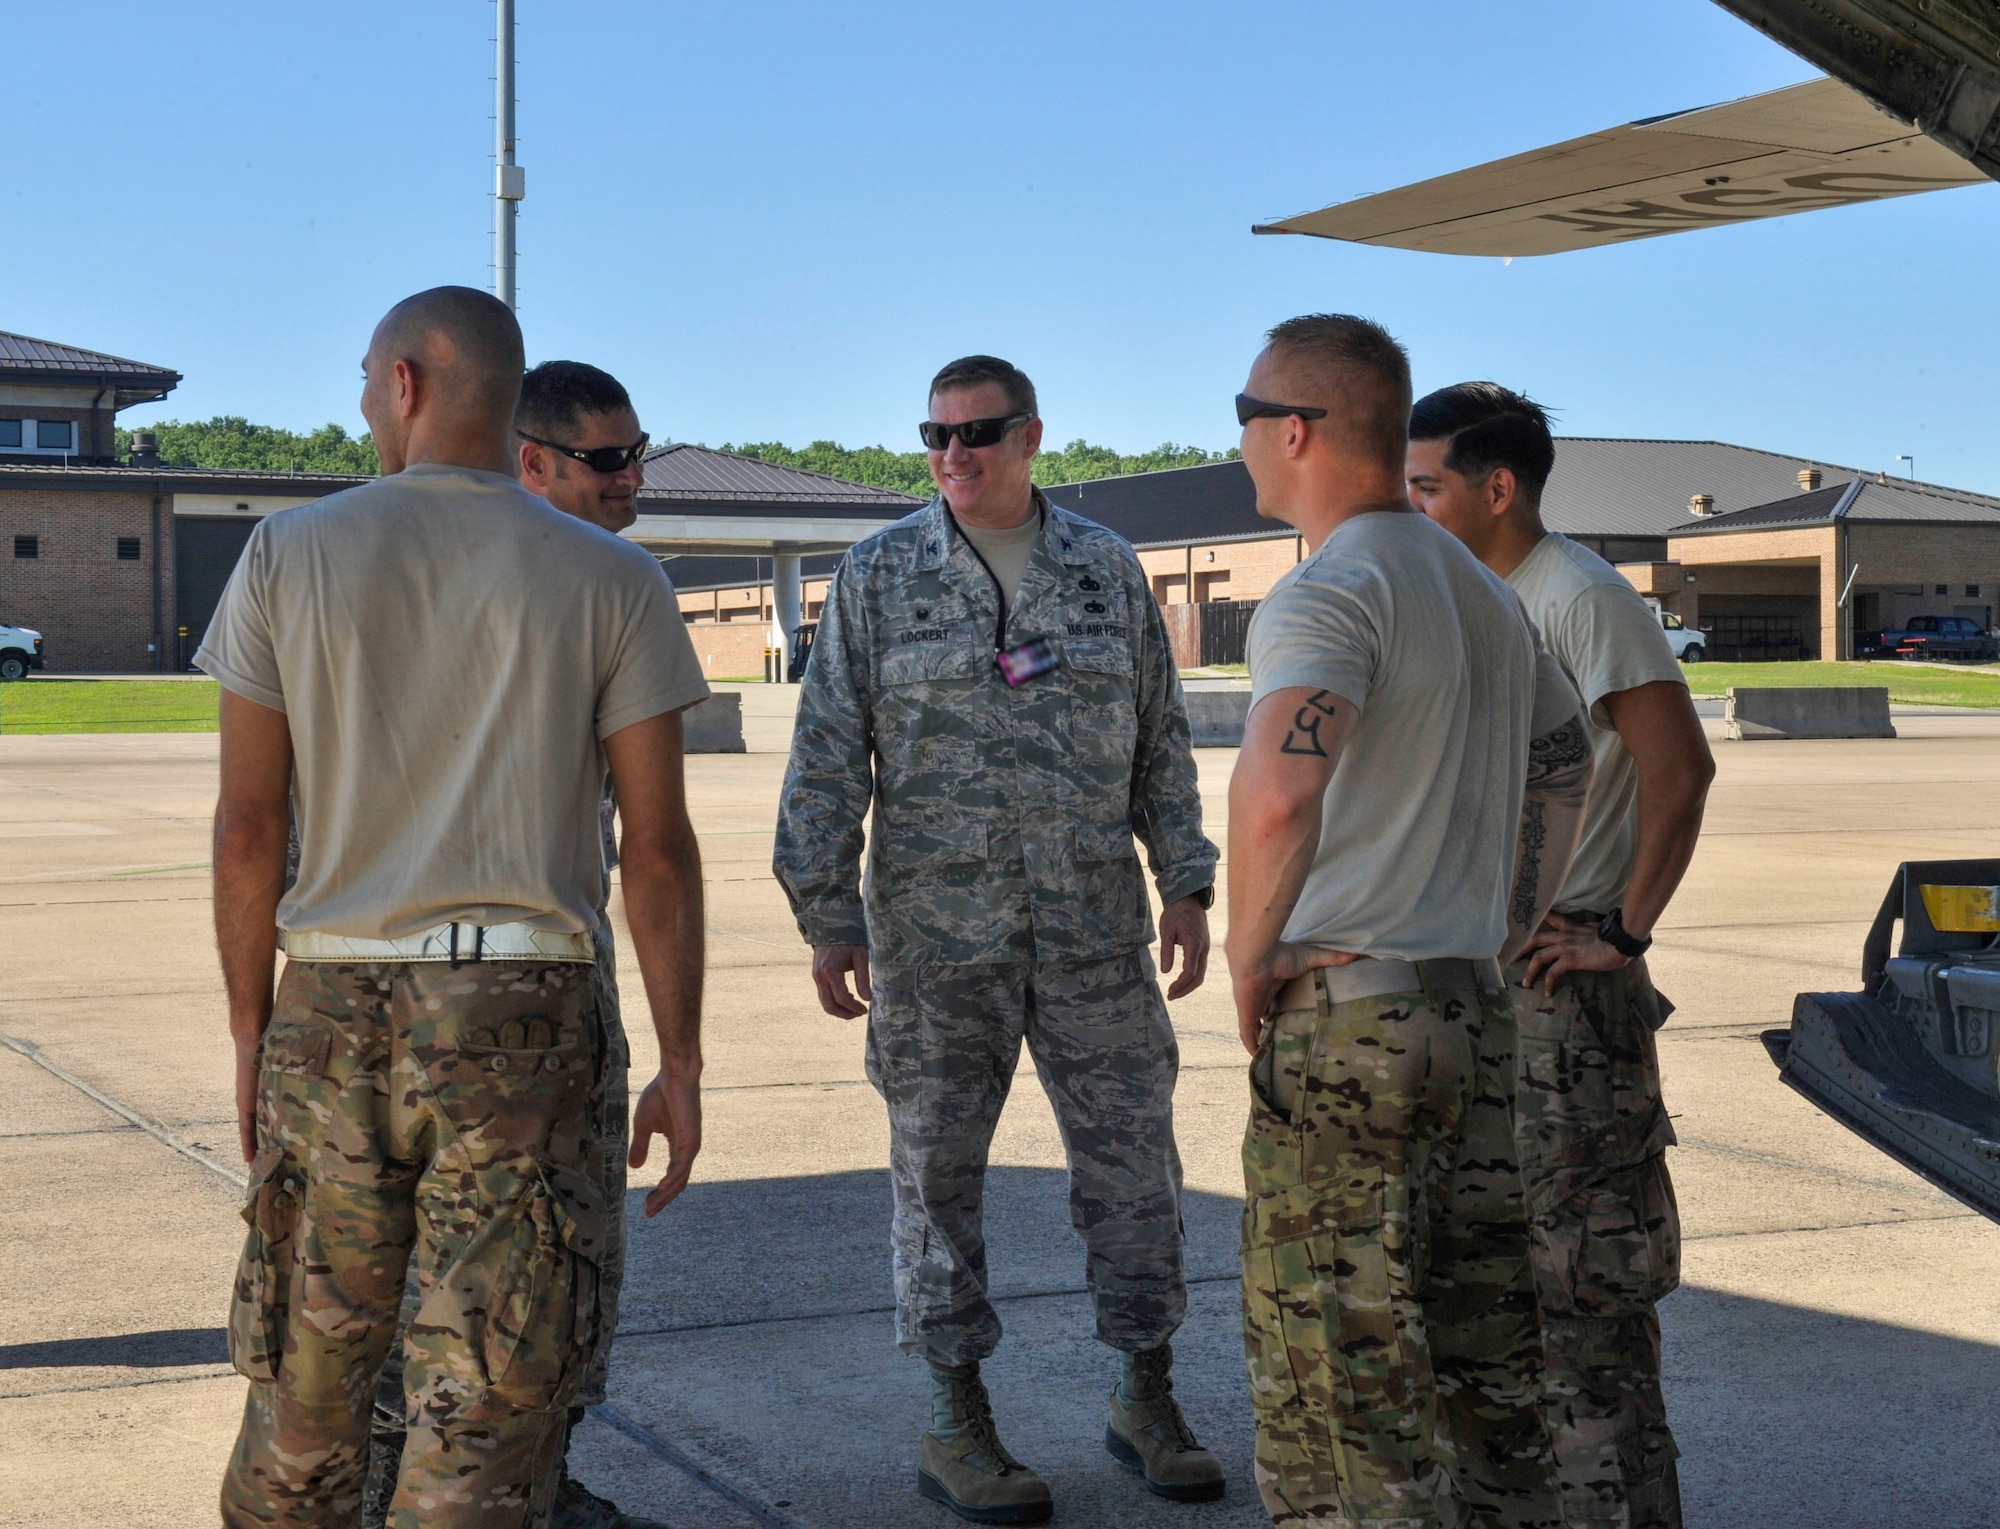 Col. Daniel Lockert, 19th Maintenance Group commander and Chief Master Sgt. Bubba Beason, 19th Aircraft Maintenance Squadron section chief, visit with Airmen as they prepare to embark on an iron swap mission June 9, 2015, at Little Rock Air Force Base, Ark. An iron swap mission exchanges  an aircraft from downrage that has maintenance issues with one from home station that is ready for the rigors of deployment operations. (U.S. Air Force photo by Senior Airman Stephanie Serrano)